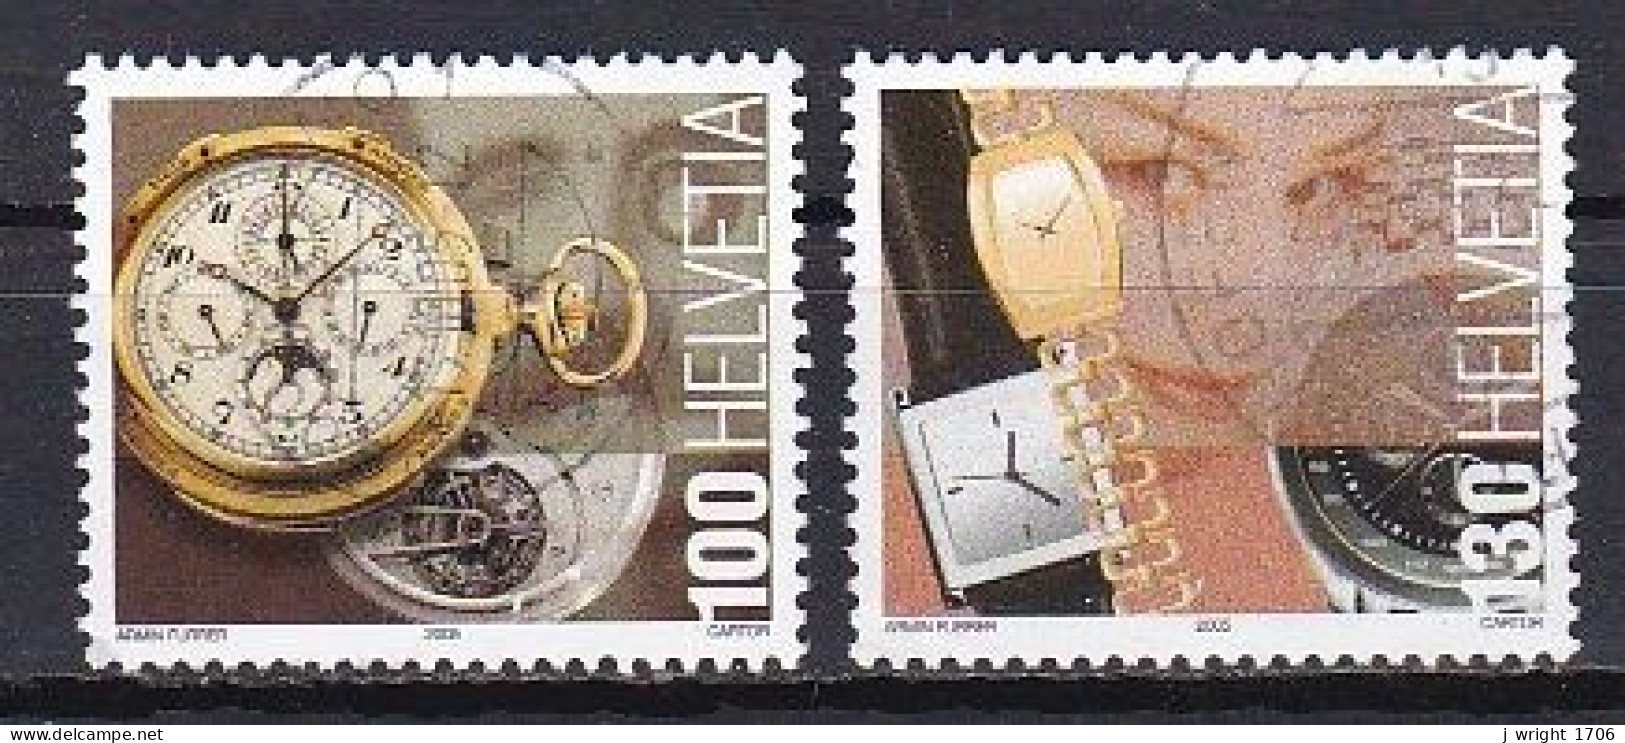 Switzerland, 2005, Traditional Swiss Products/Watches, Set, USED - Used Stamps